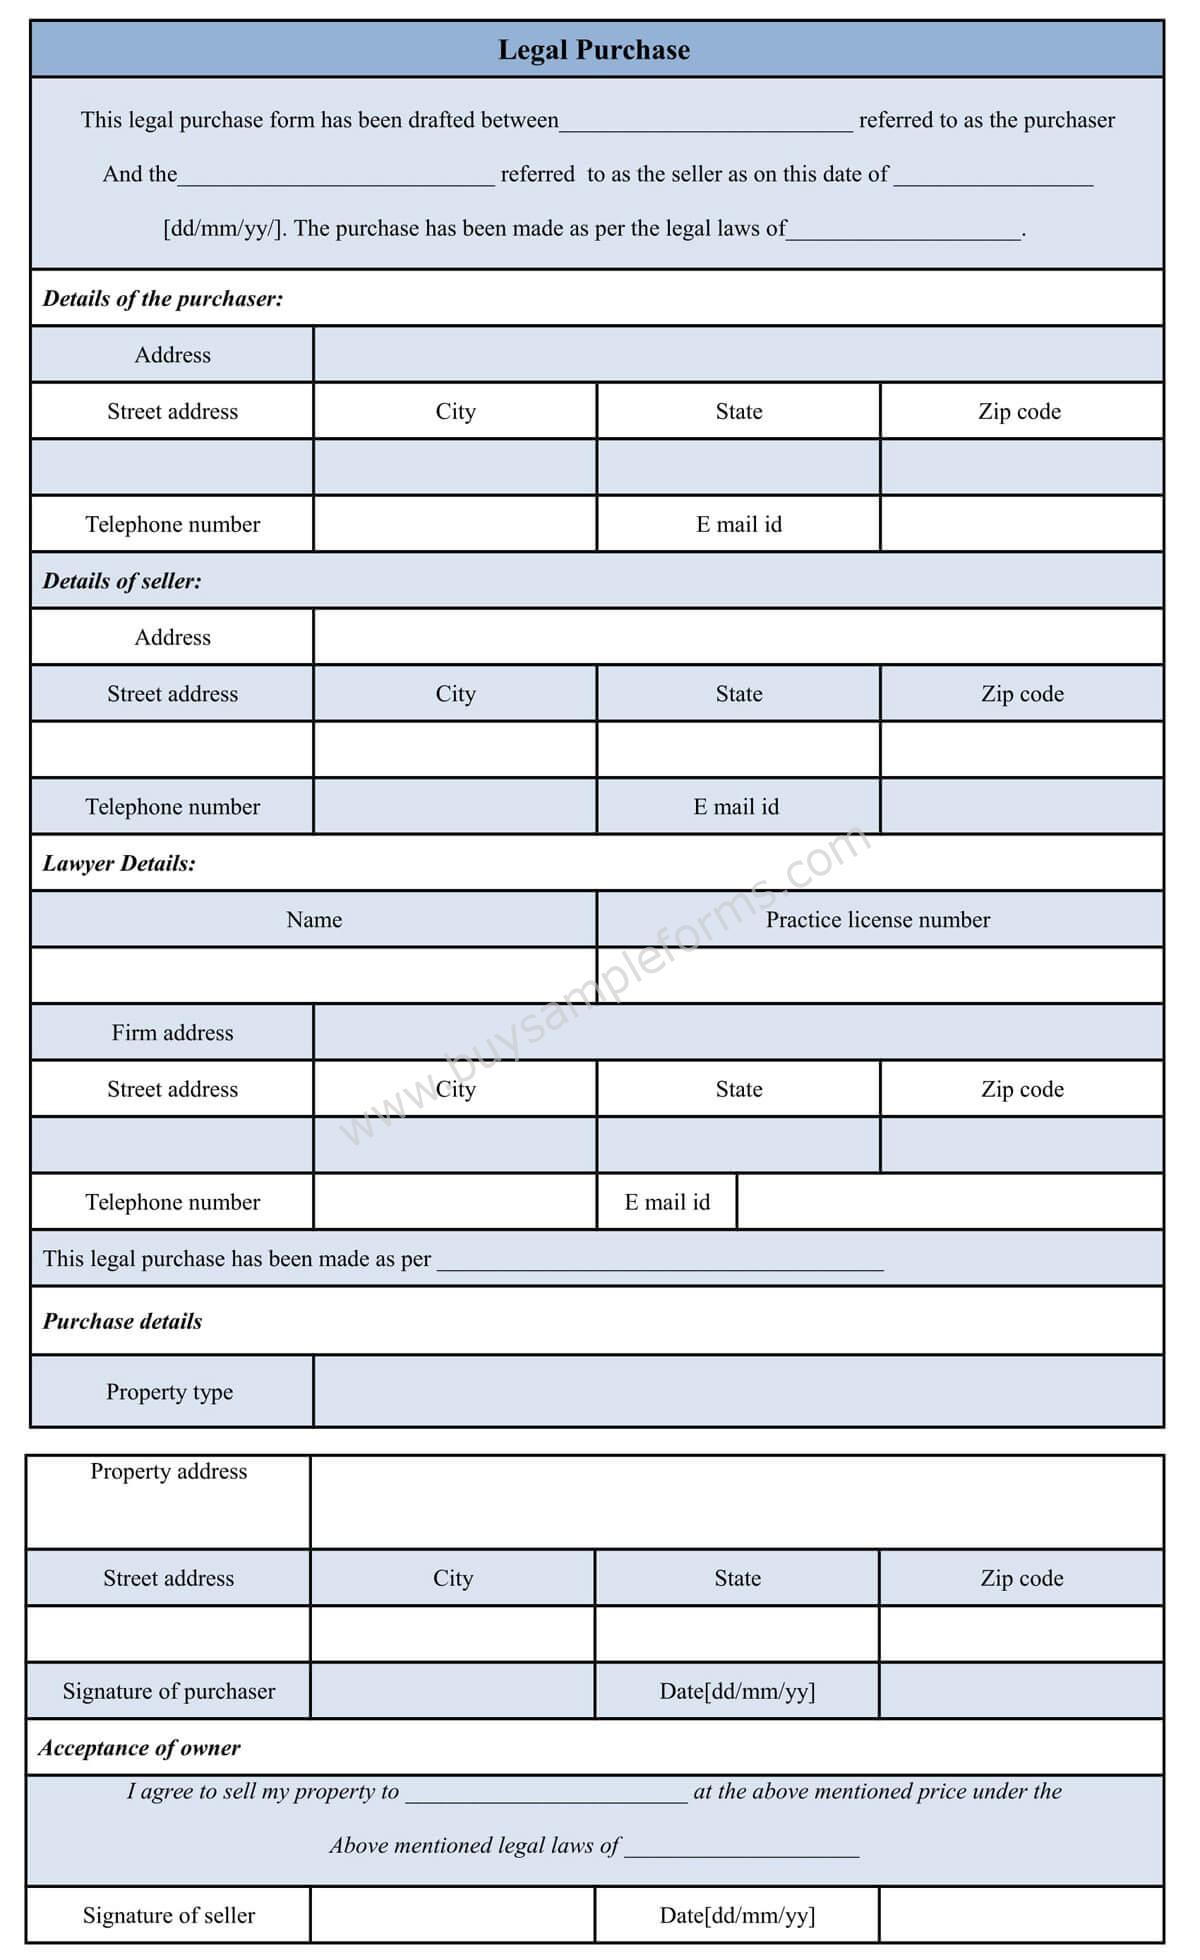 sample Legal Purchase Form template word